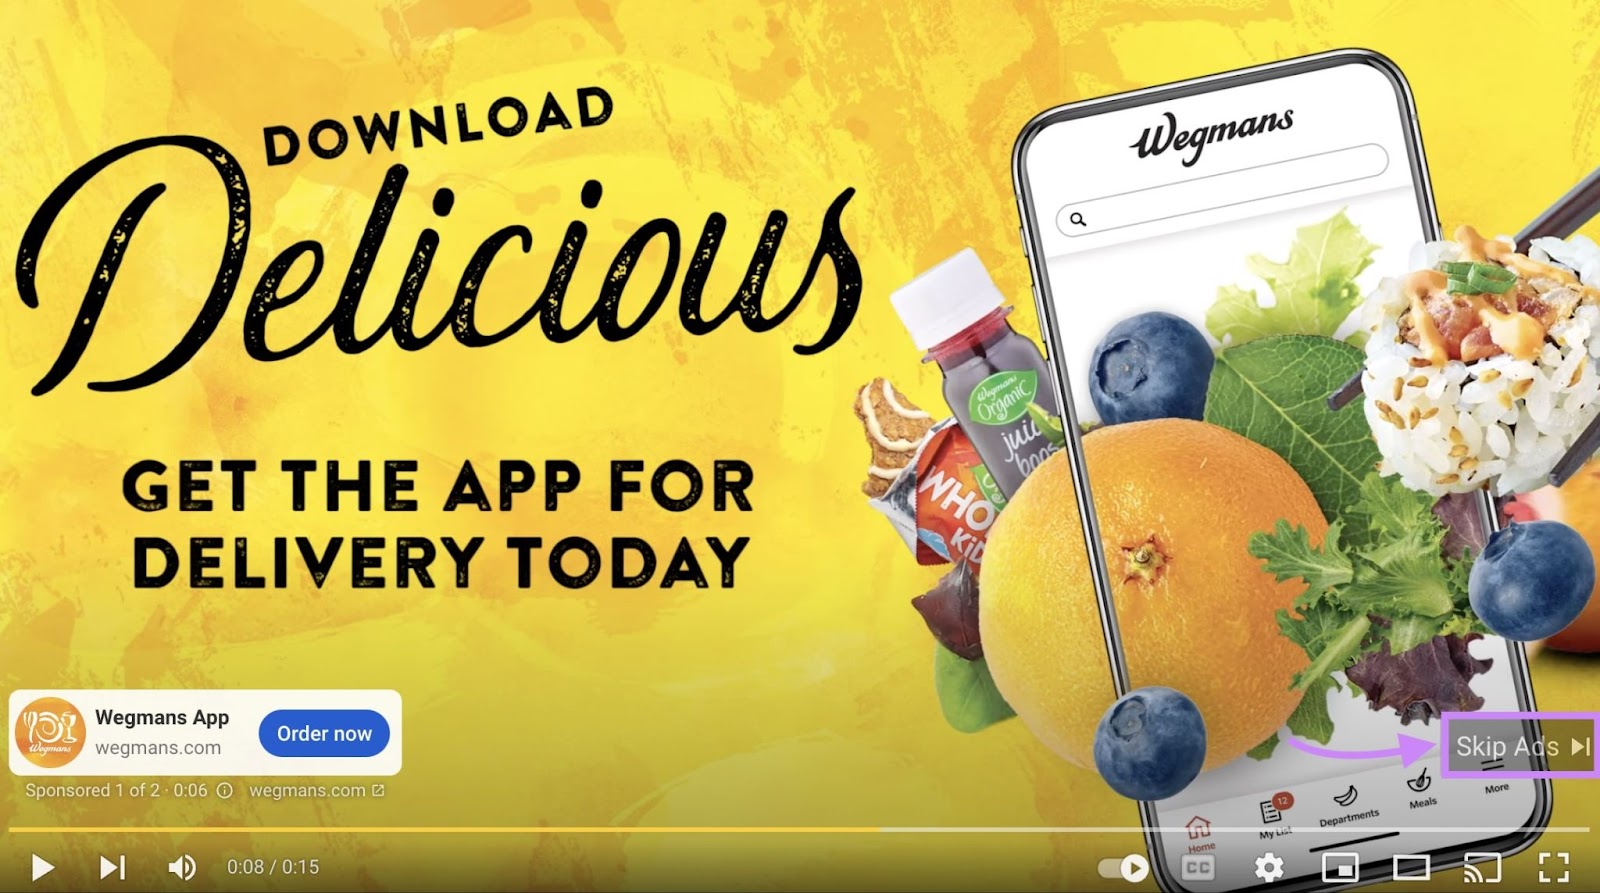 An example of skippable in-stream ad for "Wegmans App" on YouTube